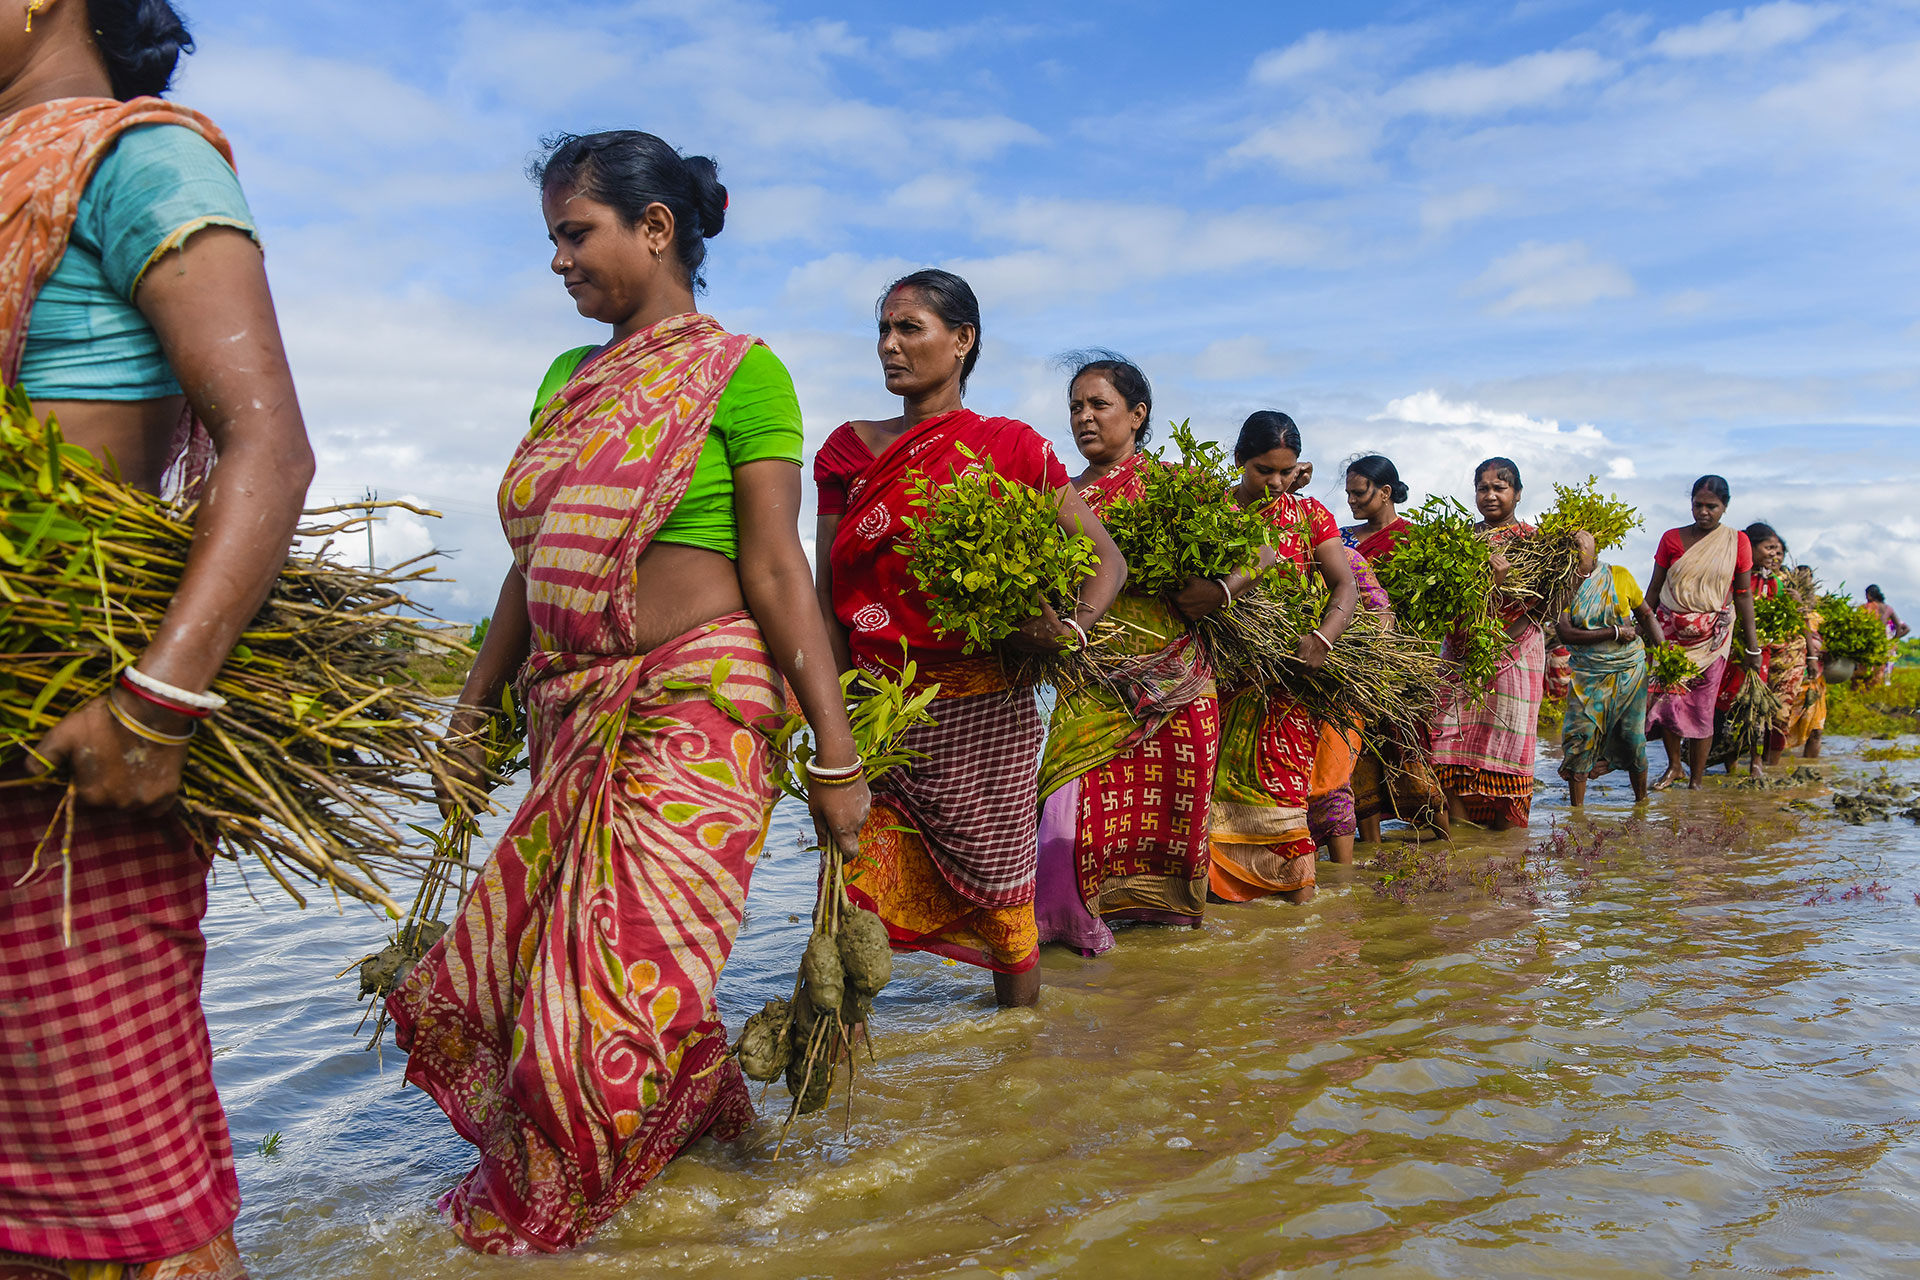 Just as these Indian women are moving forward with determination to replant their mangroves, SCO enters 2023 determined to deliver new operational tools, including global mangrove monitoring. 